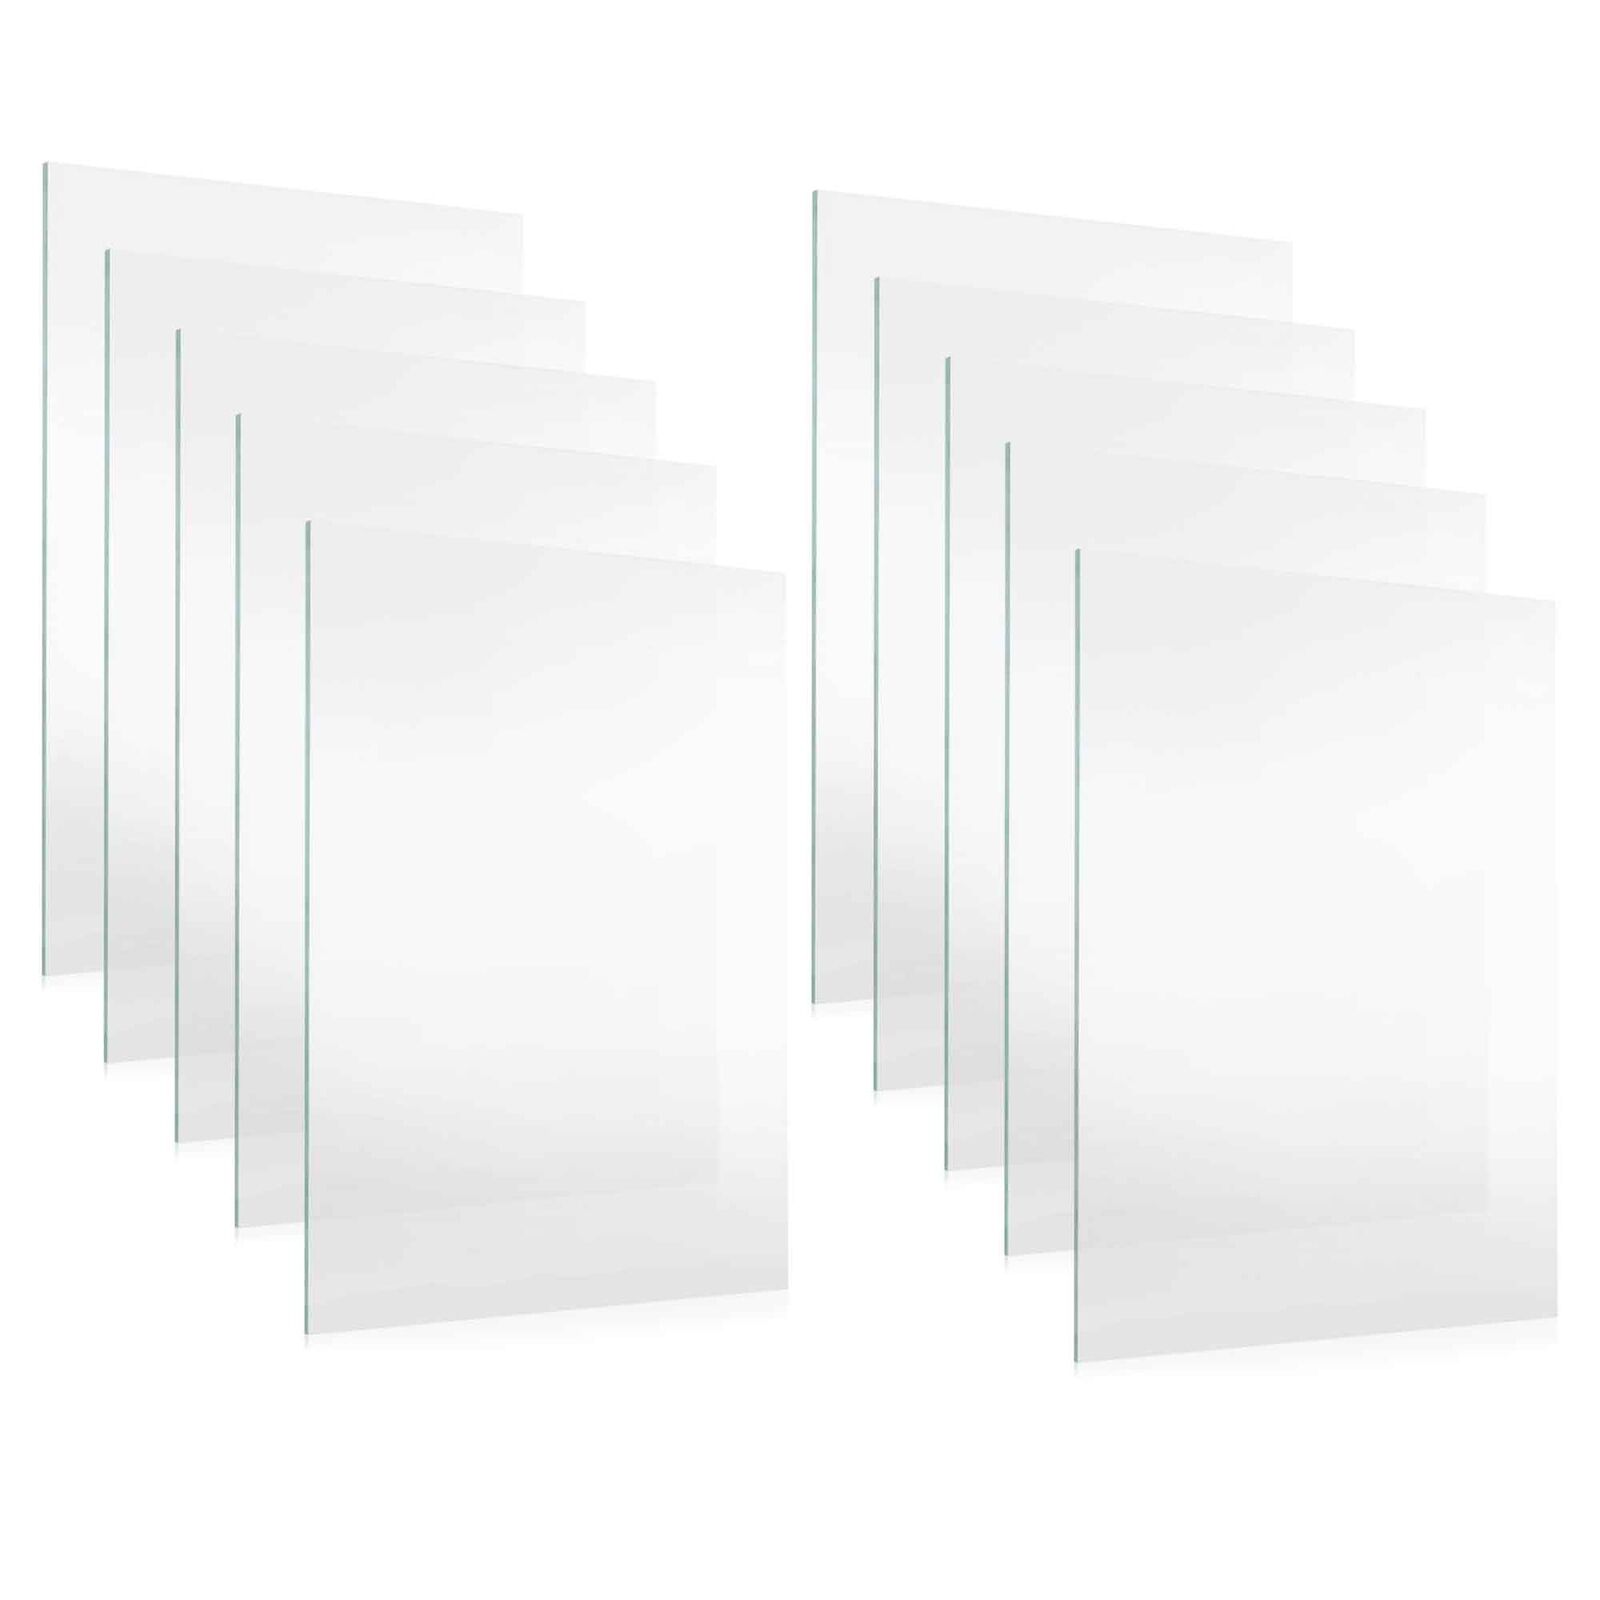 10 Sheets Of Non-Glare UV-Resistant Frame-Grade Acrylic Replacement for 16x20